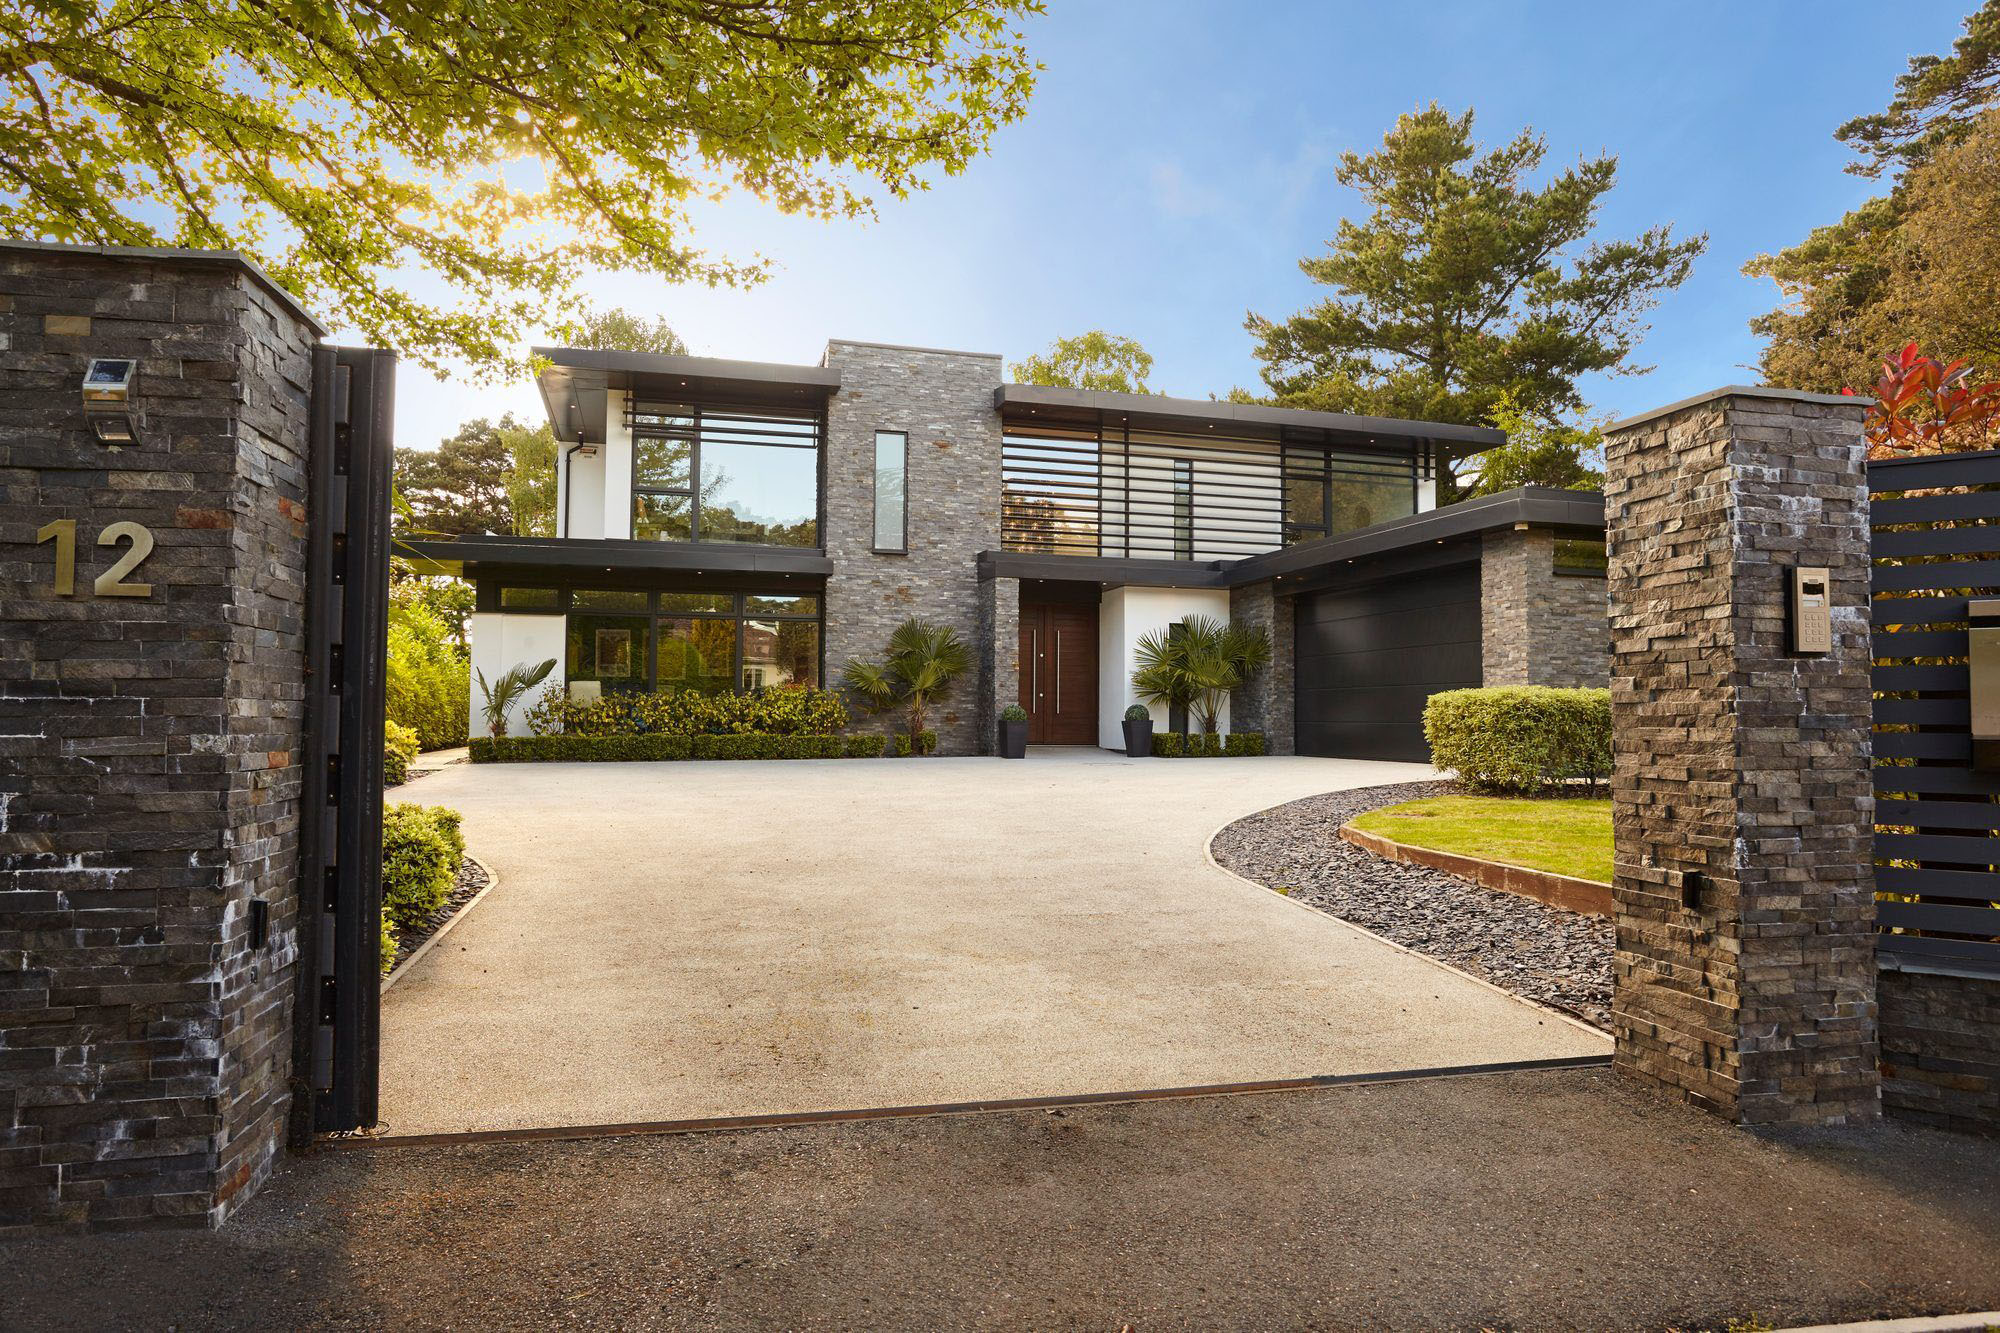 Beautiful modern home design with real stone siding, white stucco and black metal. A real wood front door, black garage door and flat roof complete the exterior design.